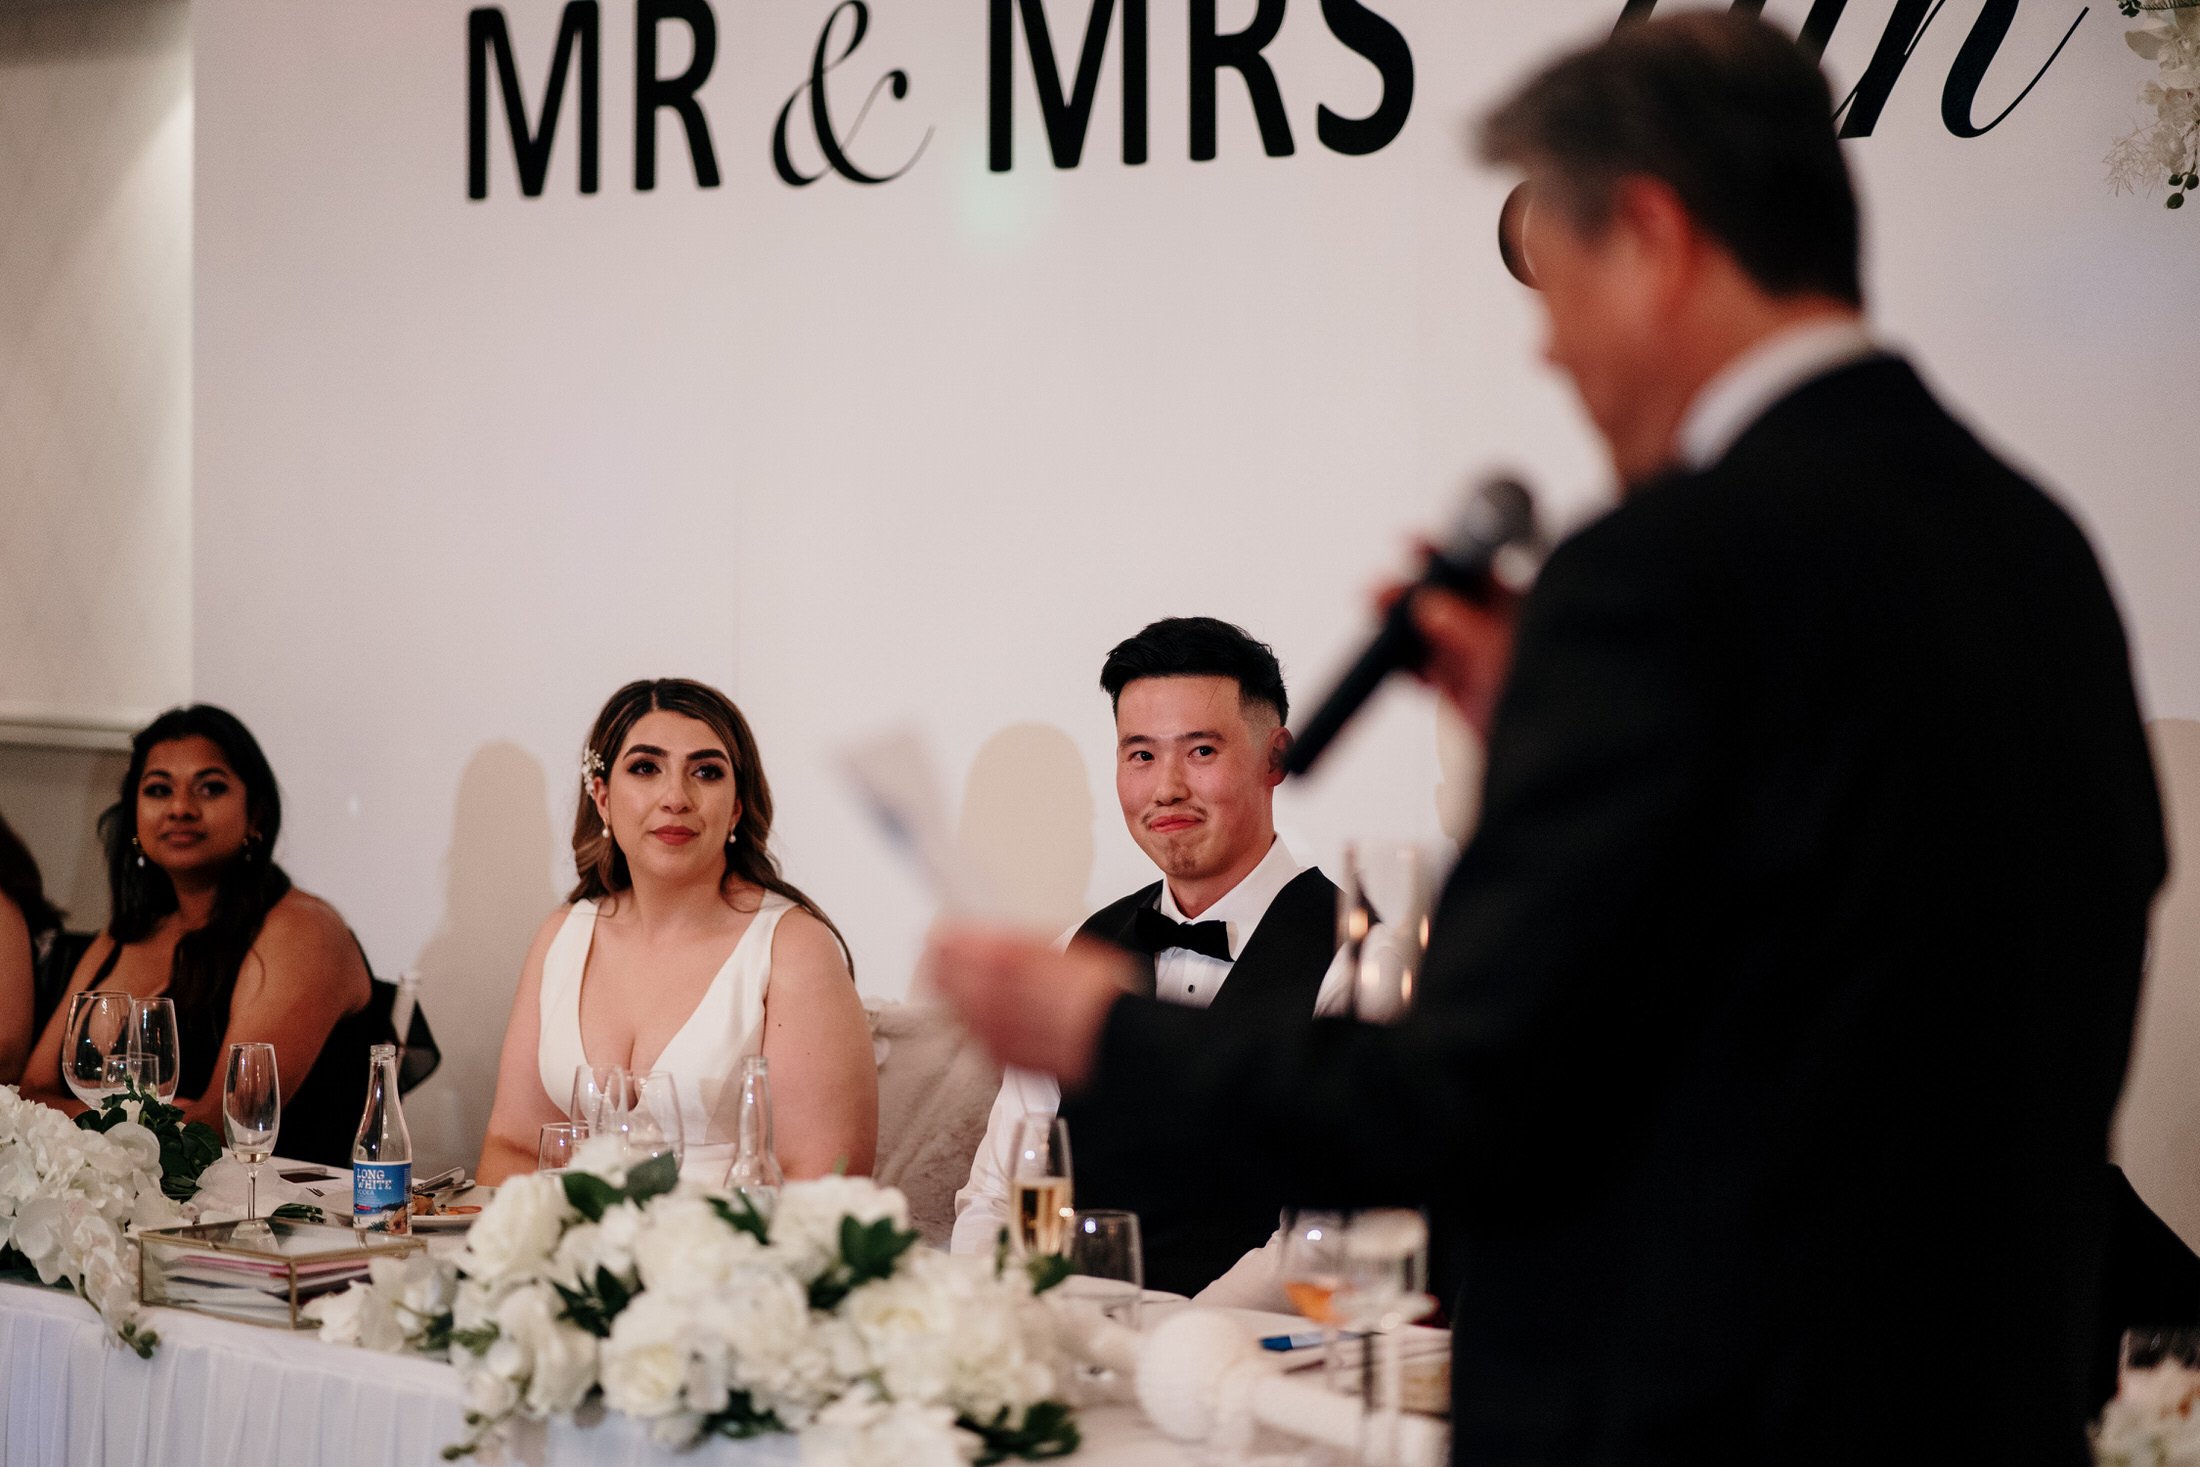 Auckland Wedding Photography &amp; Videography | South Auckland Venue | Bracu Estate Wedding Venue | Middle Eastern Wedding | Chinese | Multicultural Wedding | Wedding Reception Dance